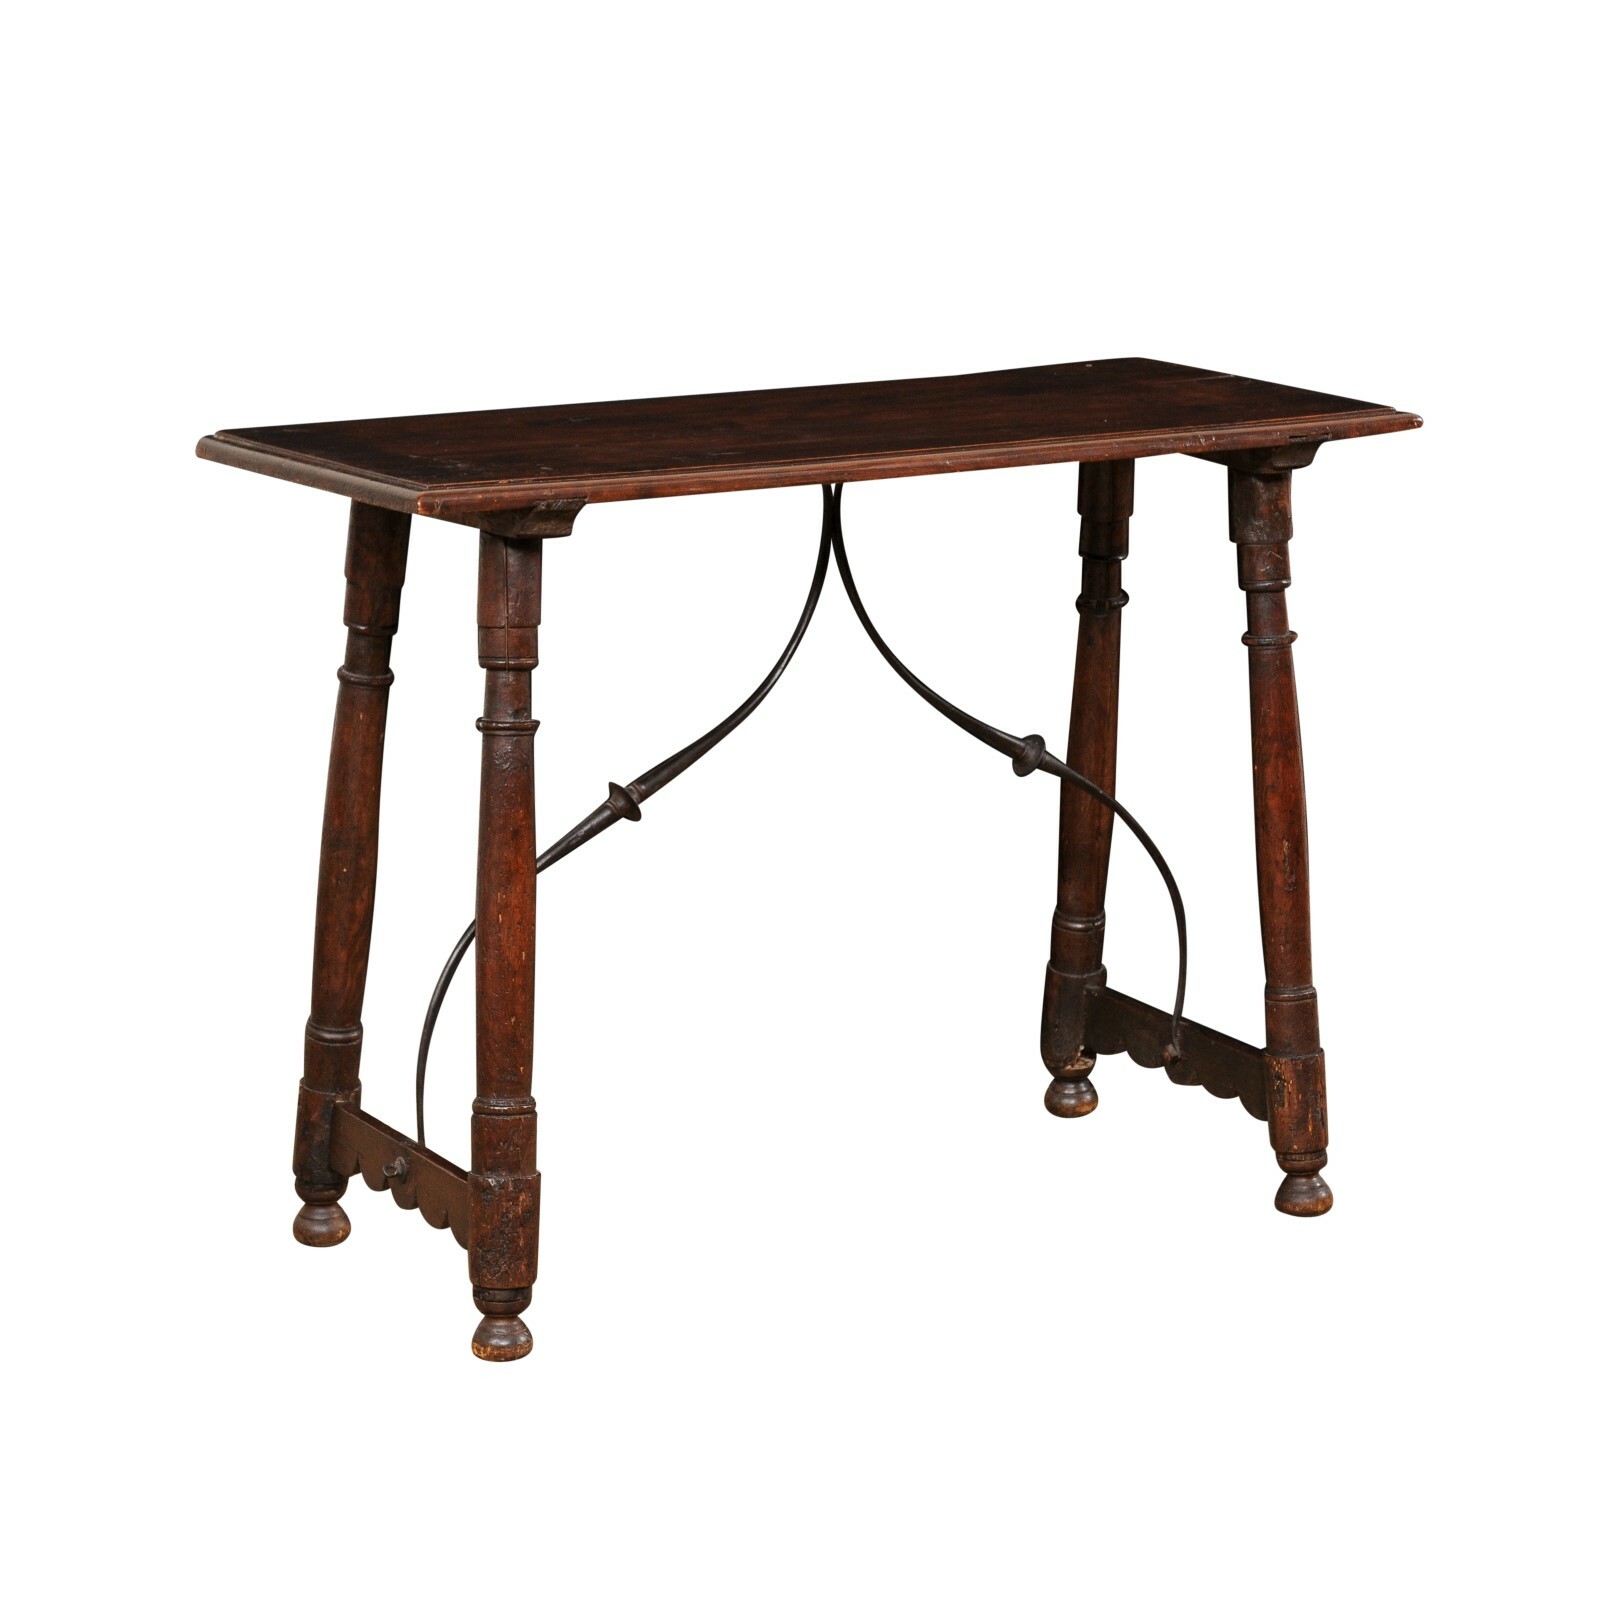 Italian Stretcher Table, Early 19th C.